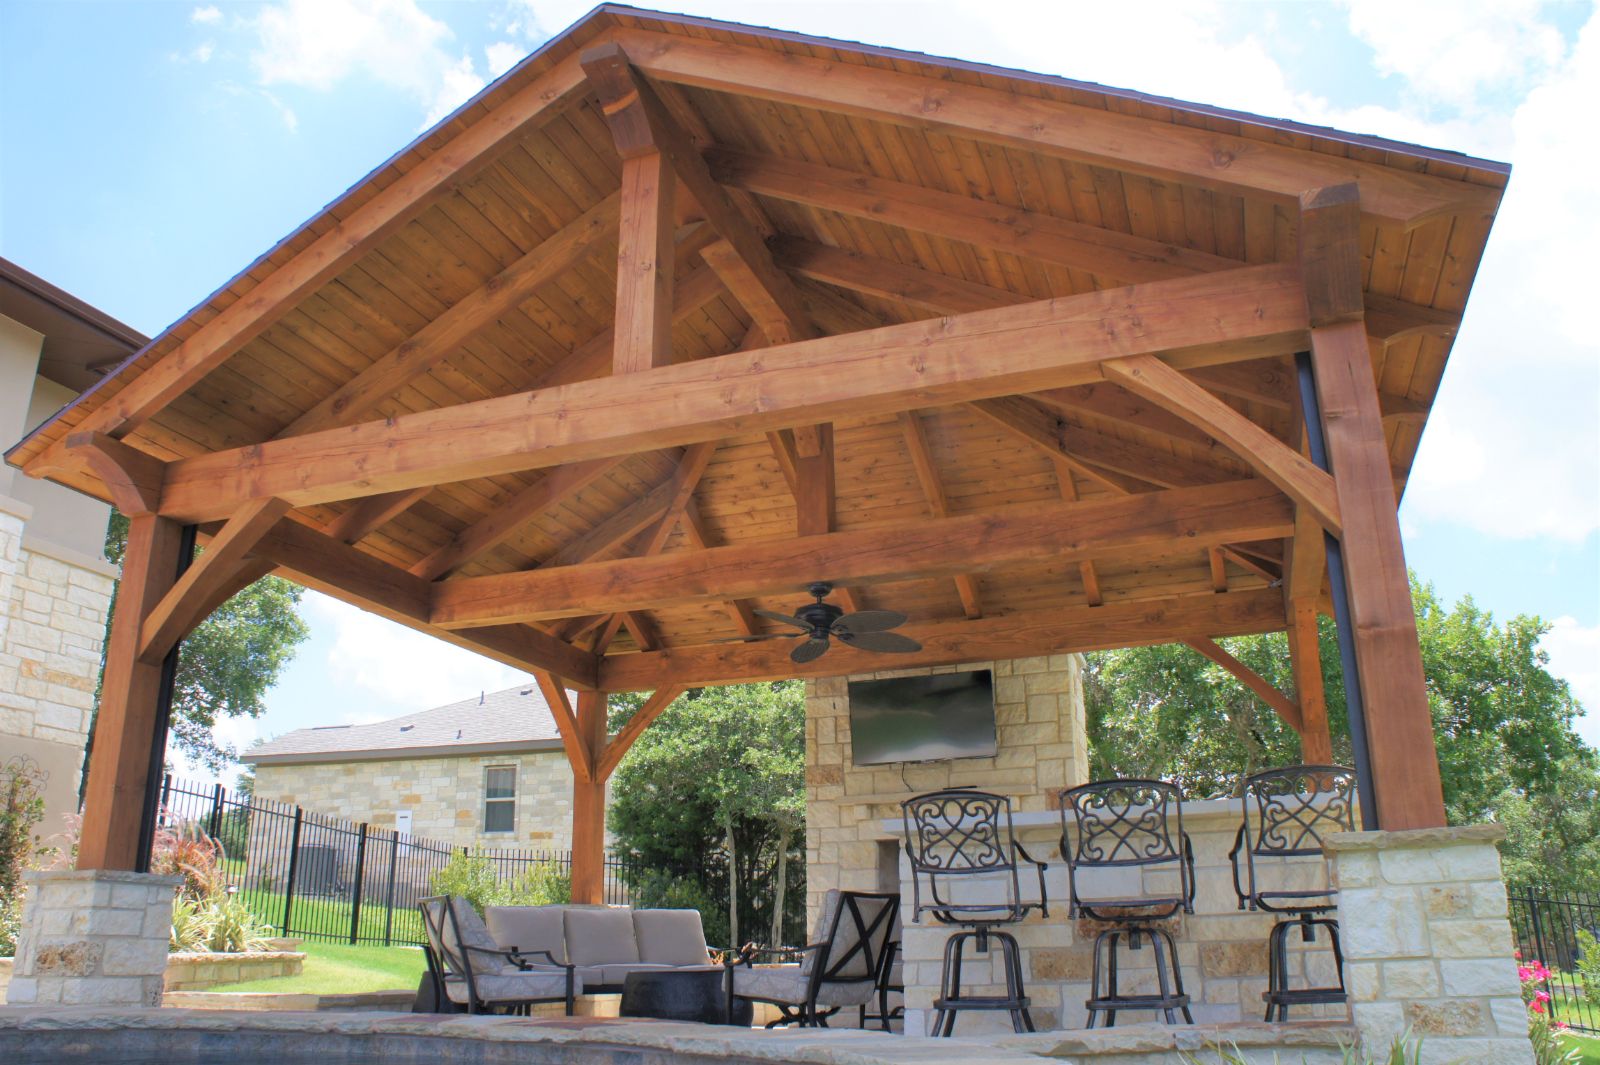 22x19, Leander, King Post Half Hip, Heavy Timbers, Kitchen or outdoor kitchen, outdoor living, covered patio, cabana, entertaining, garden structure, pavilion kit, pre fav, Austin, builder/contractor, pool house